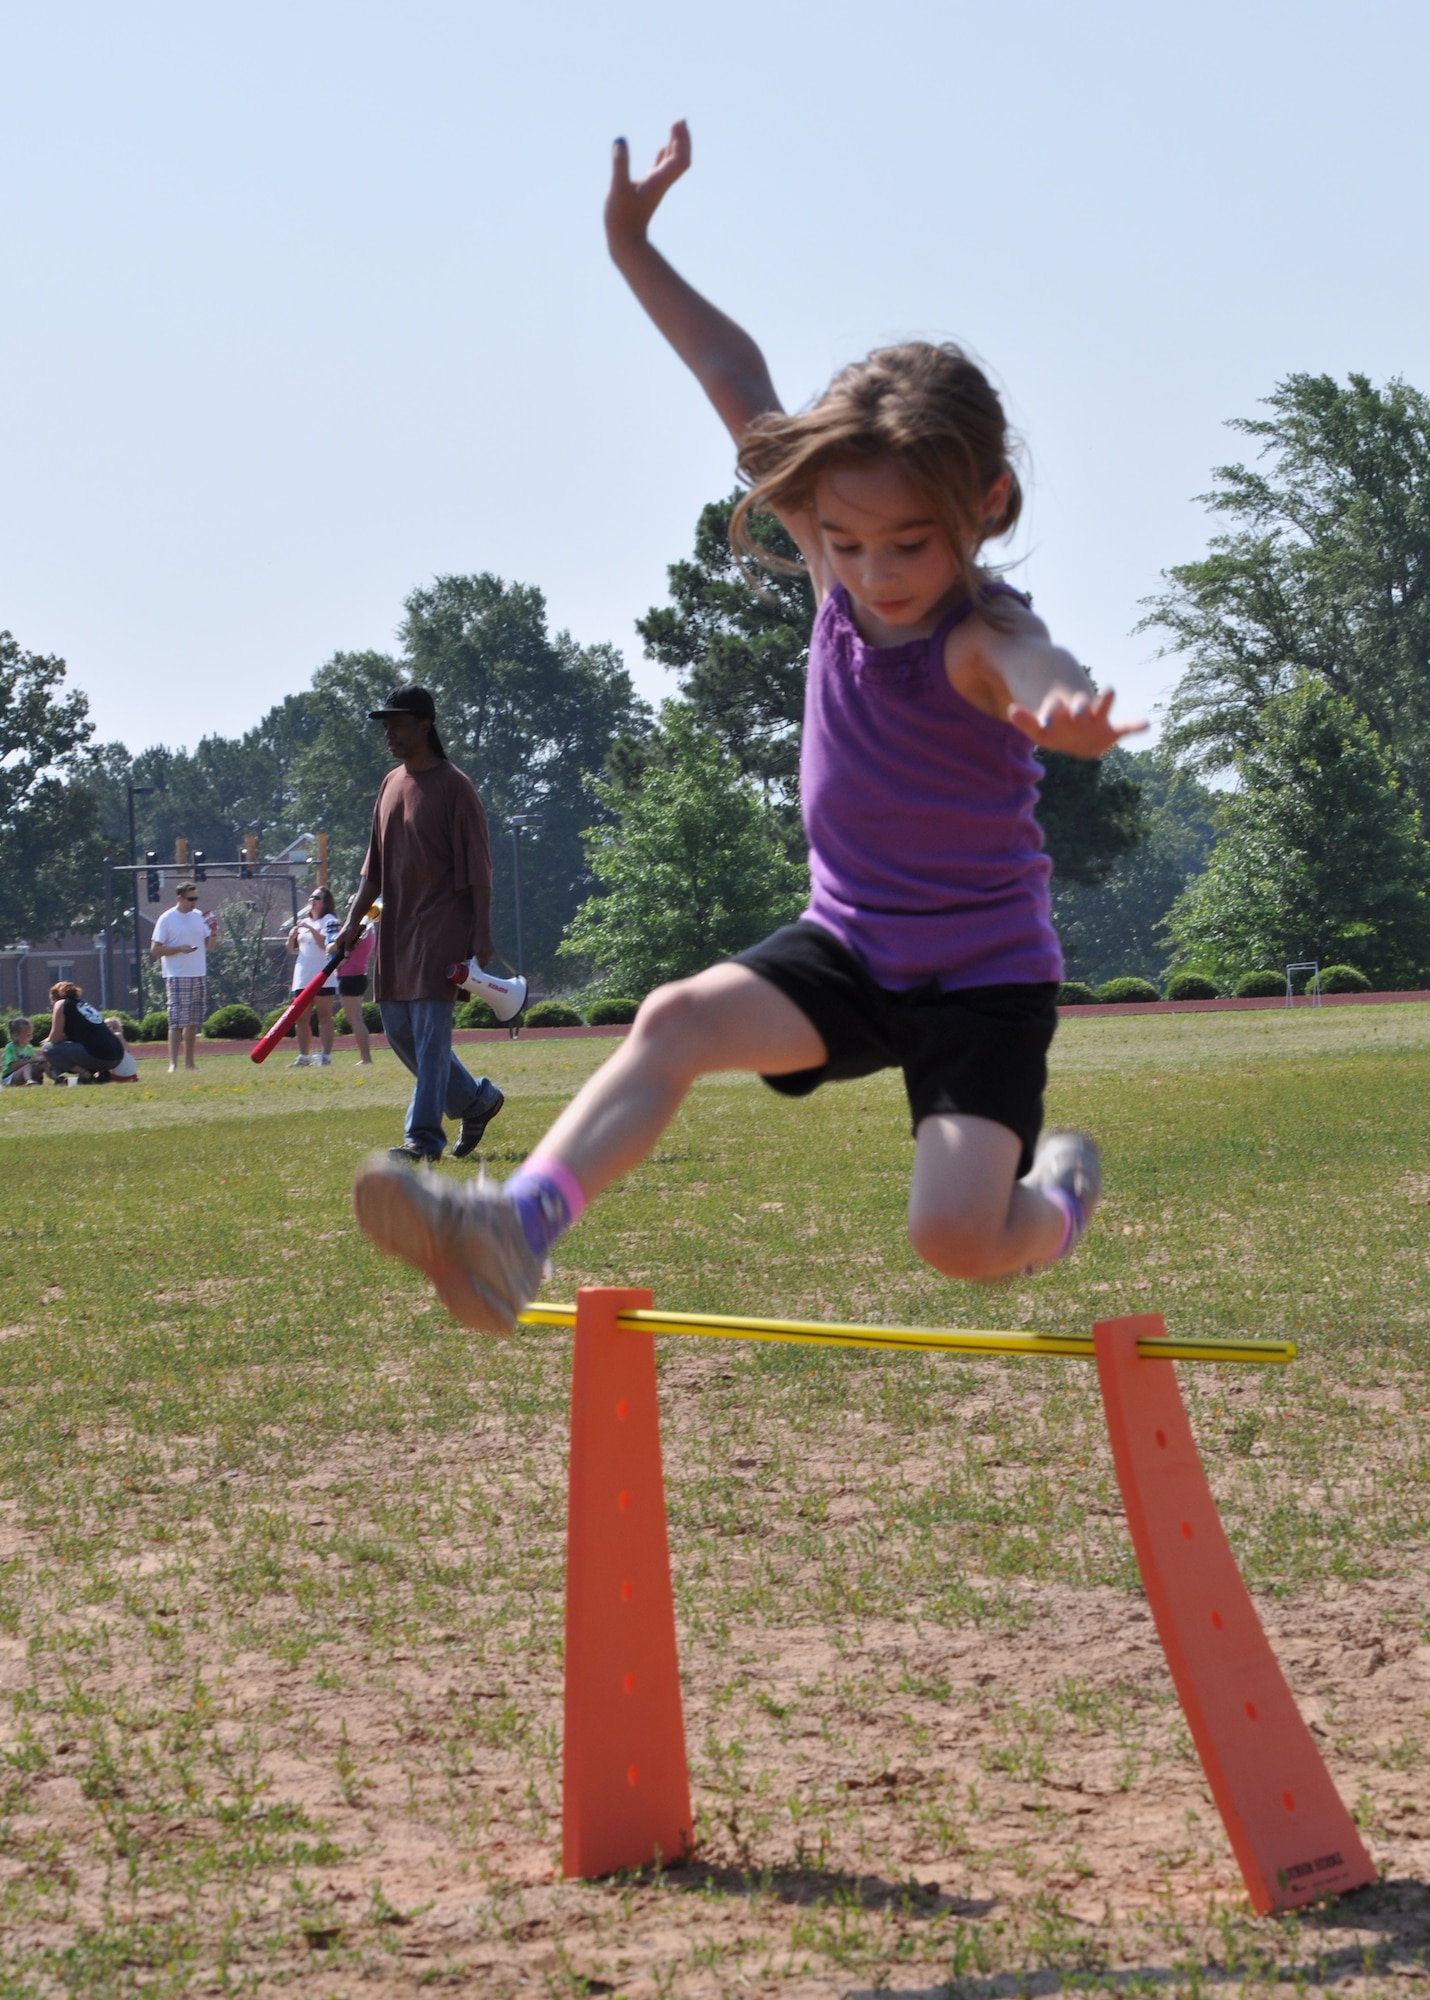 Paige Shuss, daughter of a Team Little Rock member, leaps a hurdle during kid's Field Day at the Warfit Track May 19, 2012, at Little Rock Air Force Base, Ark. Field Day gave children from all over the base a chance to play outside, and had specific stations adapted for exceptional family members. (U.S. Air Force photo by Staff Sgt. Jacob Barreiro)